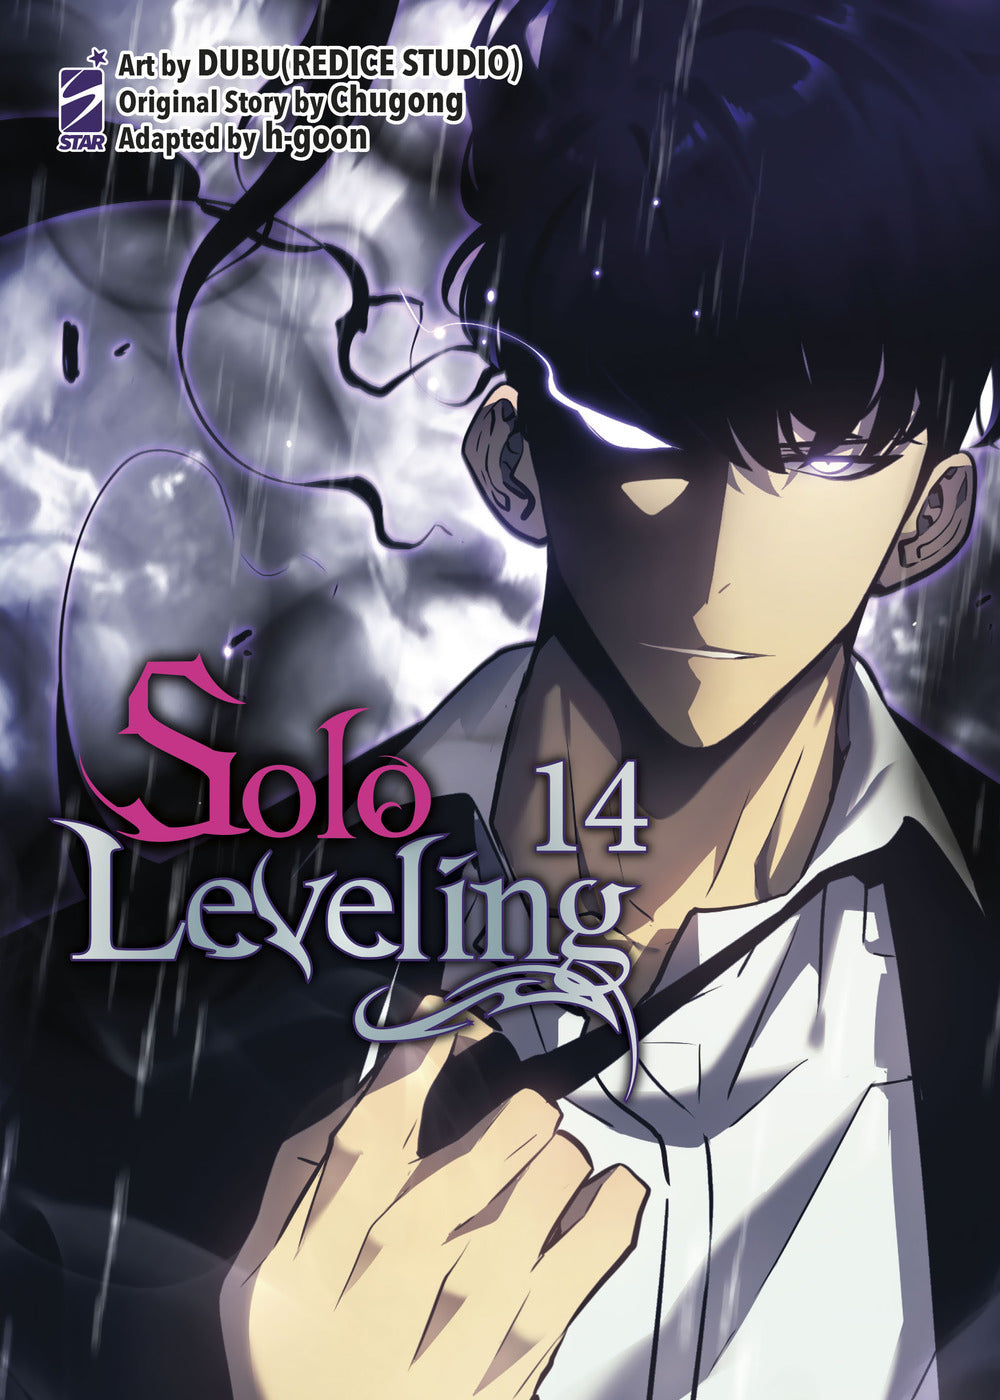 Solo leveling. Vol. 14